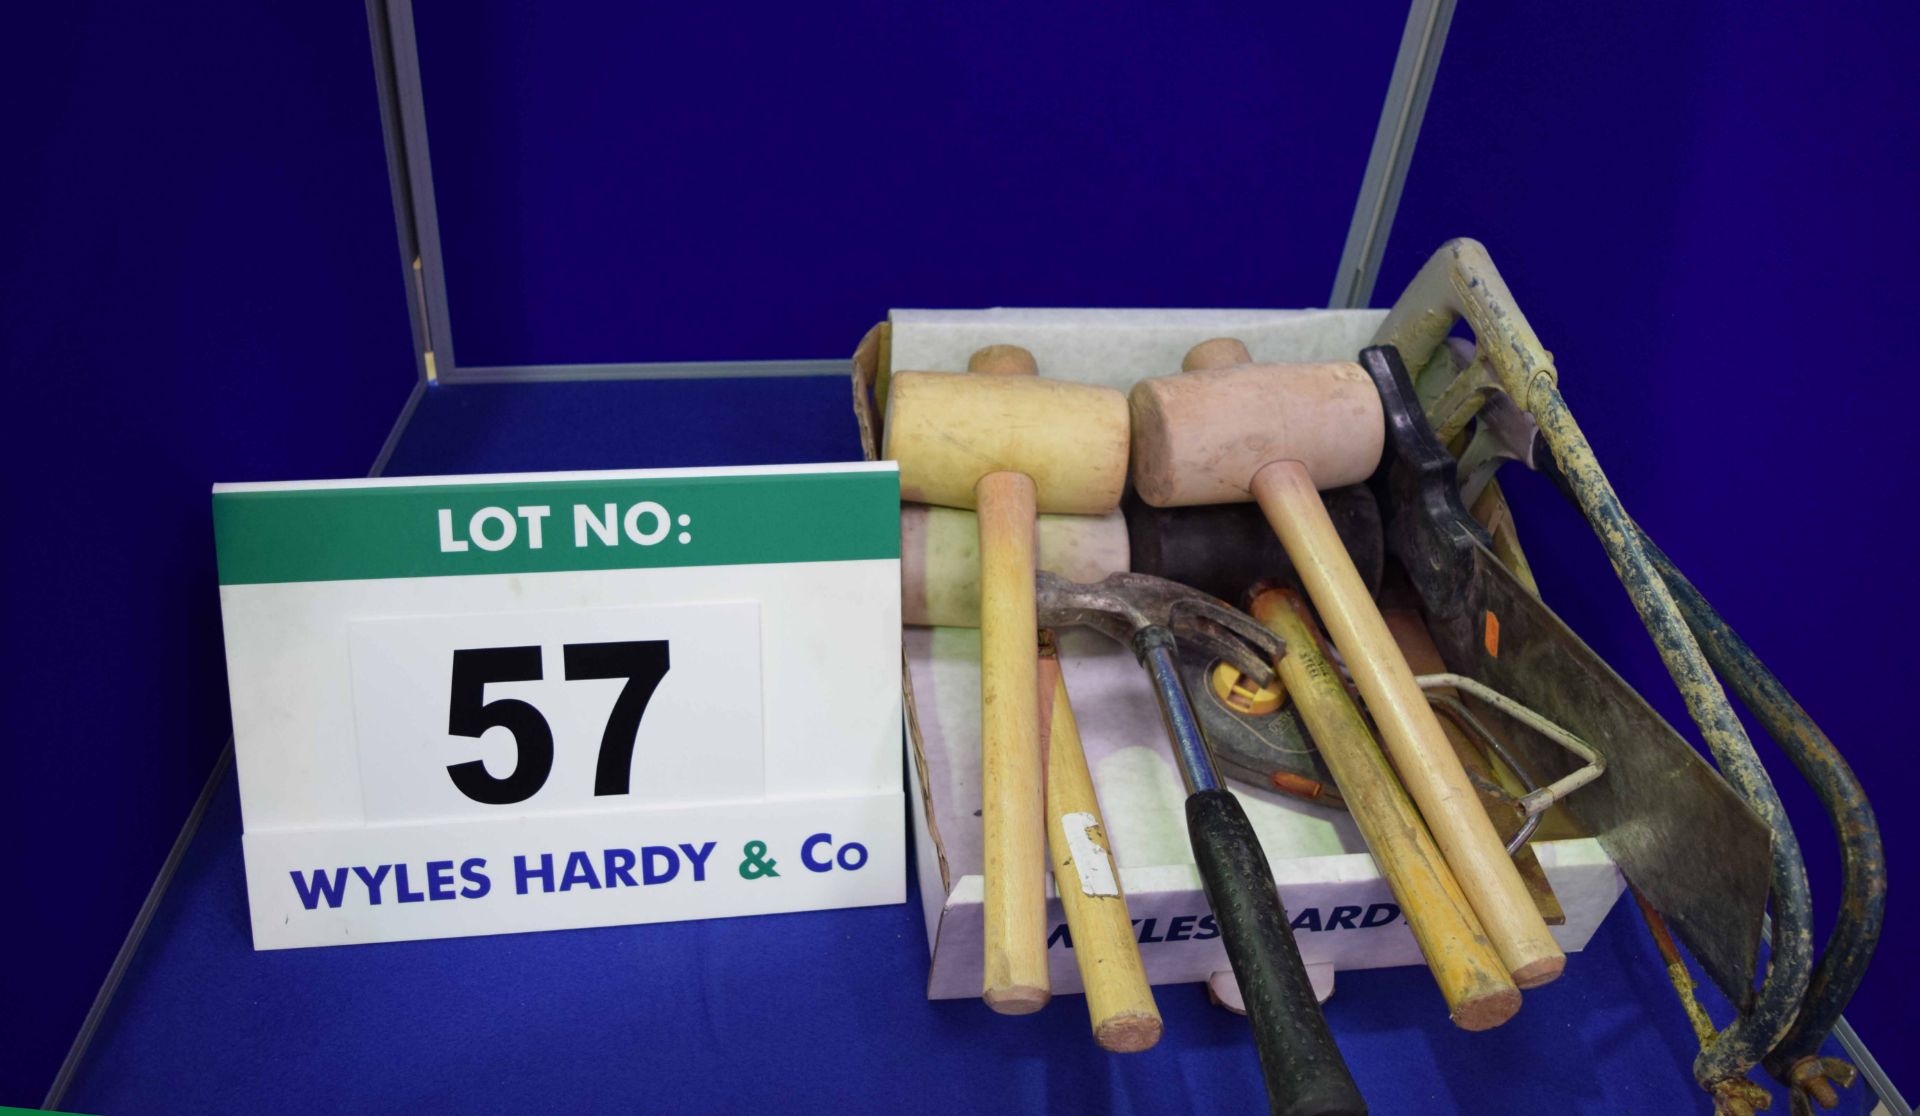 A Quantity of Hand Tools (As Photographed)